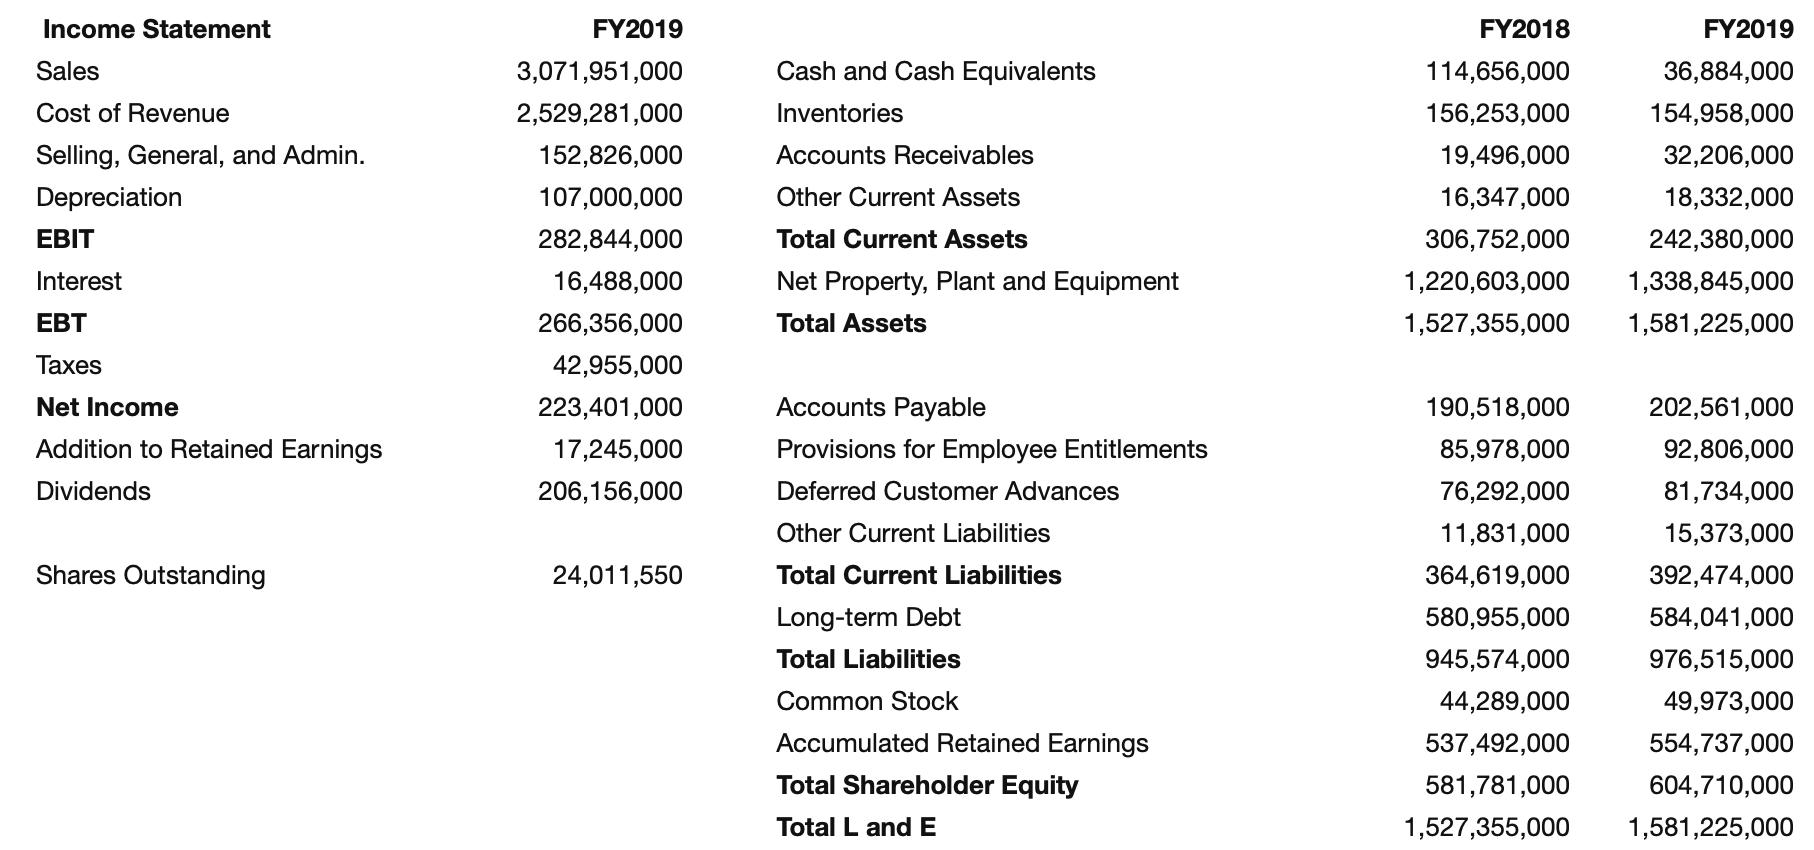 Income Statement FY2019 FY2018 FY2019 Sales Cash and Cash Equivalents Inventories Accounts Receivables Cost of Revenue Sellin